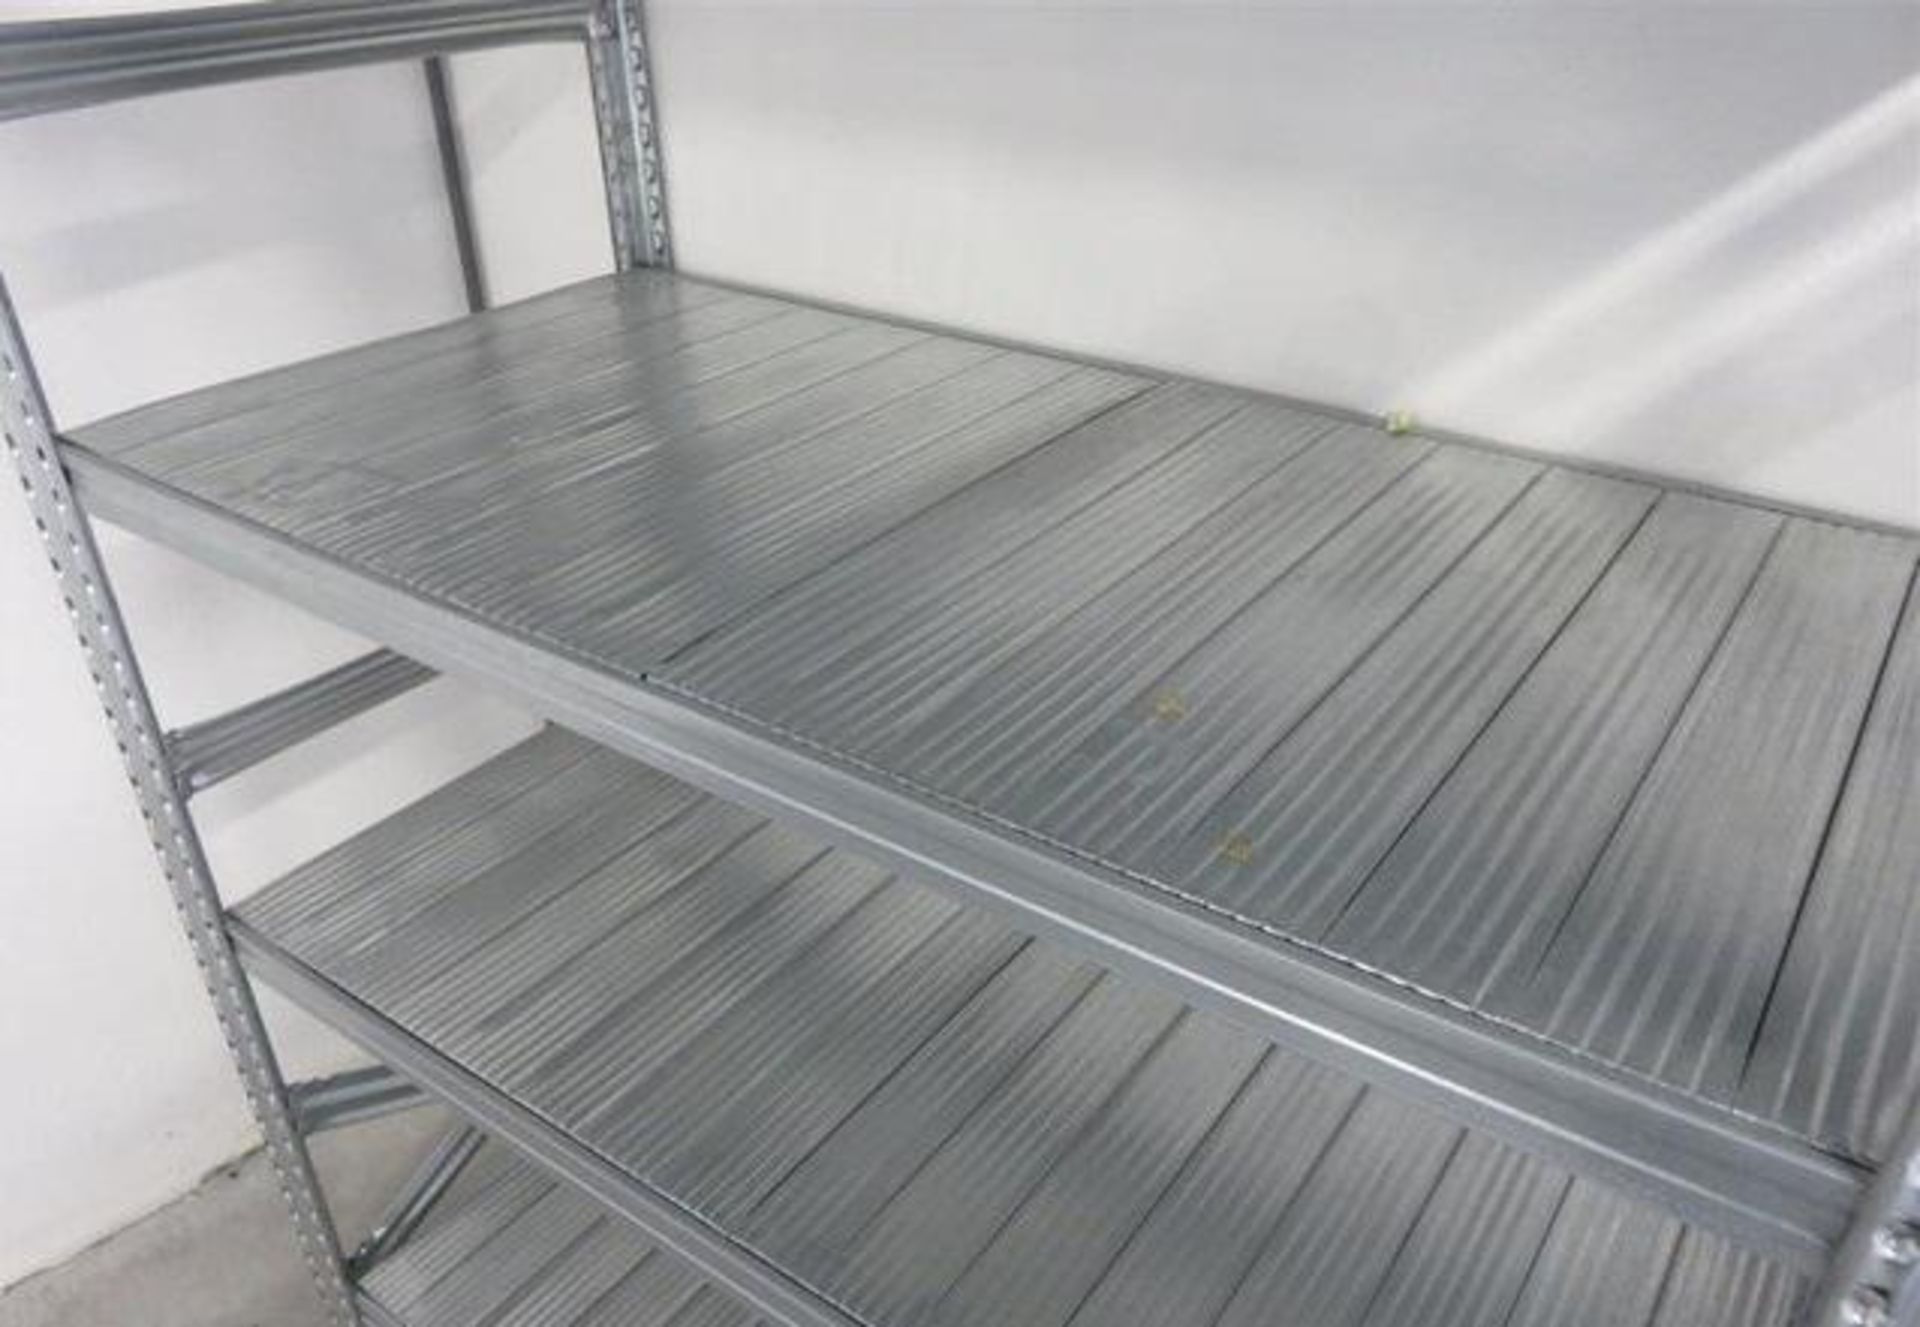 4 x Bays of Metalsistem Steel Modular Storage Shelving - Includes 65 Pieces - Recently Removed - Image 13 of 17